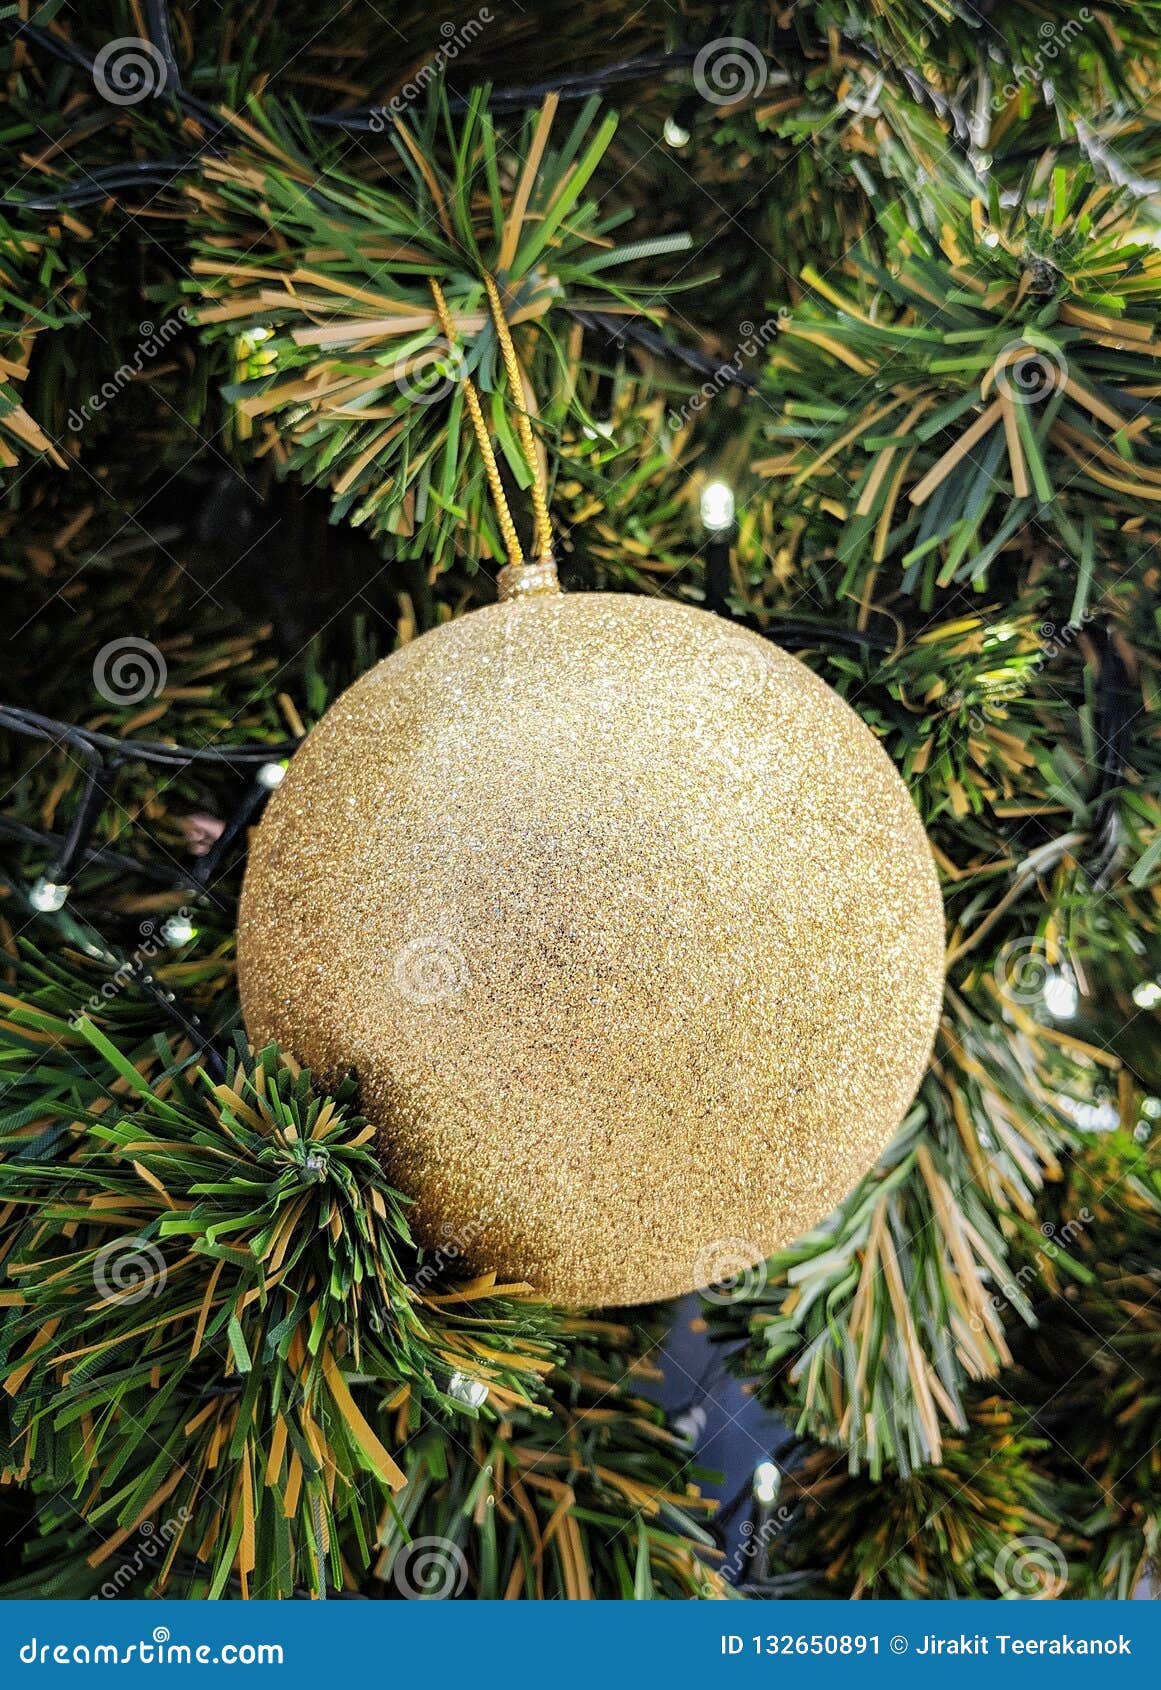 One Single Golden Ball For Christmas Tree Decoration. Stock Image ...